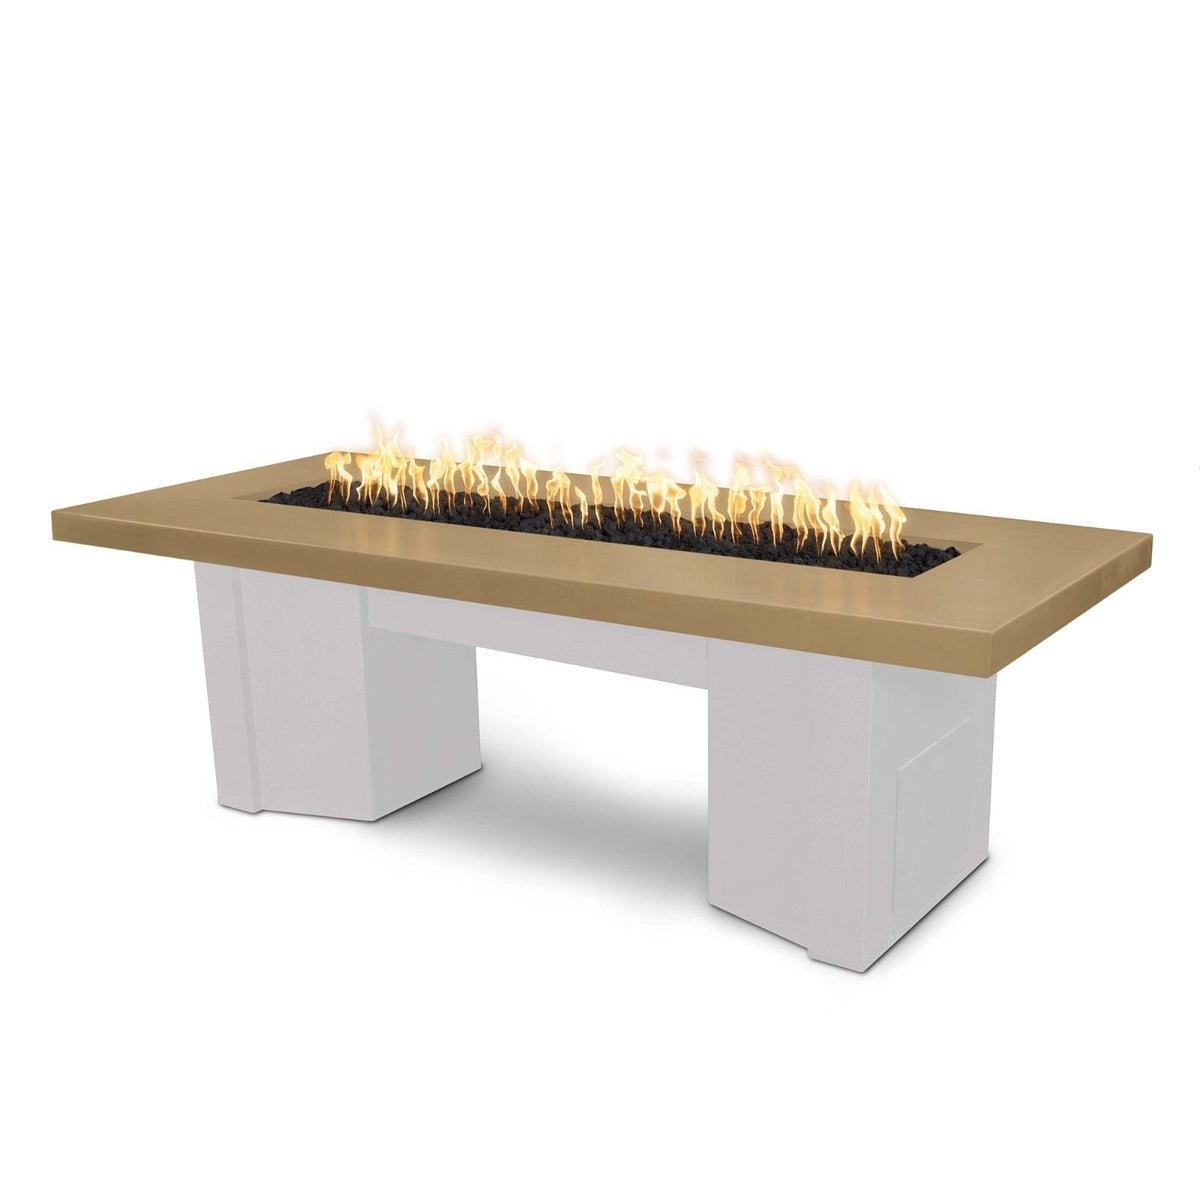 The Outdoor Plus Fire Features Brown (-BRN) / White Powder Coated Steel (-WHT) The Outdoor Plus 78&quot; Alameda Fire Table Smooth Concrete in Natural Gas - Flame Sense System with Push Button Spark Igniter / OPT-ALMGFRC78FSEN-NG